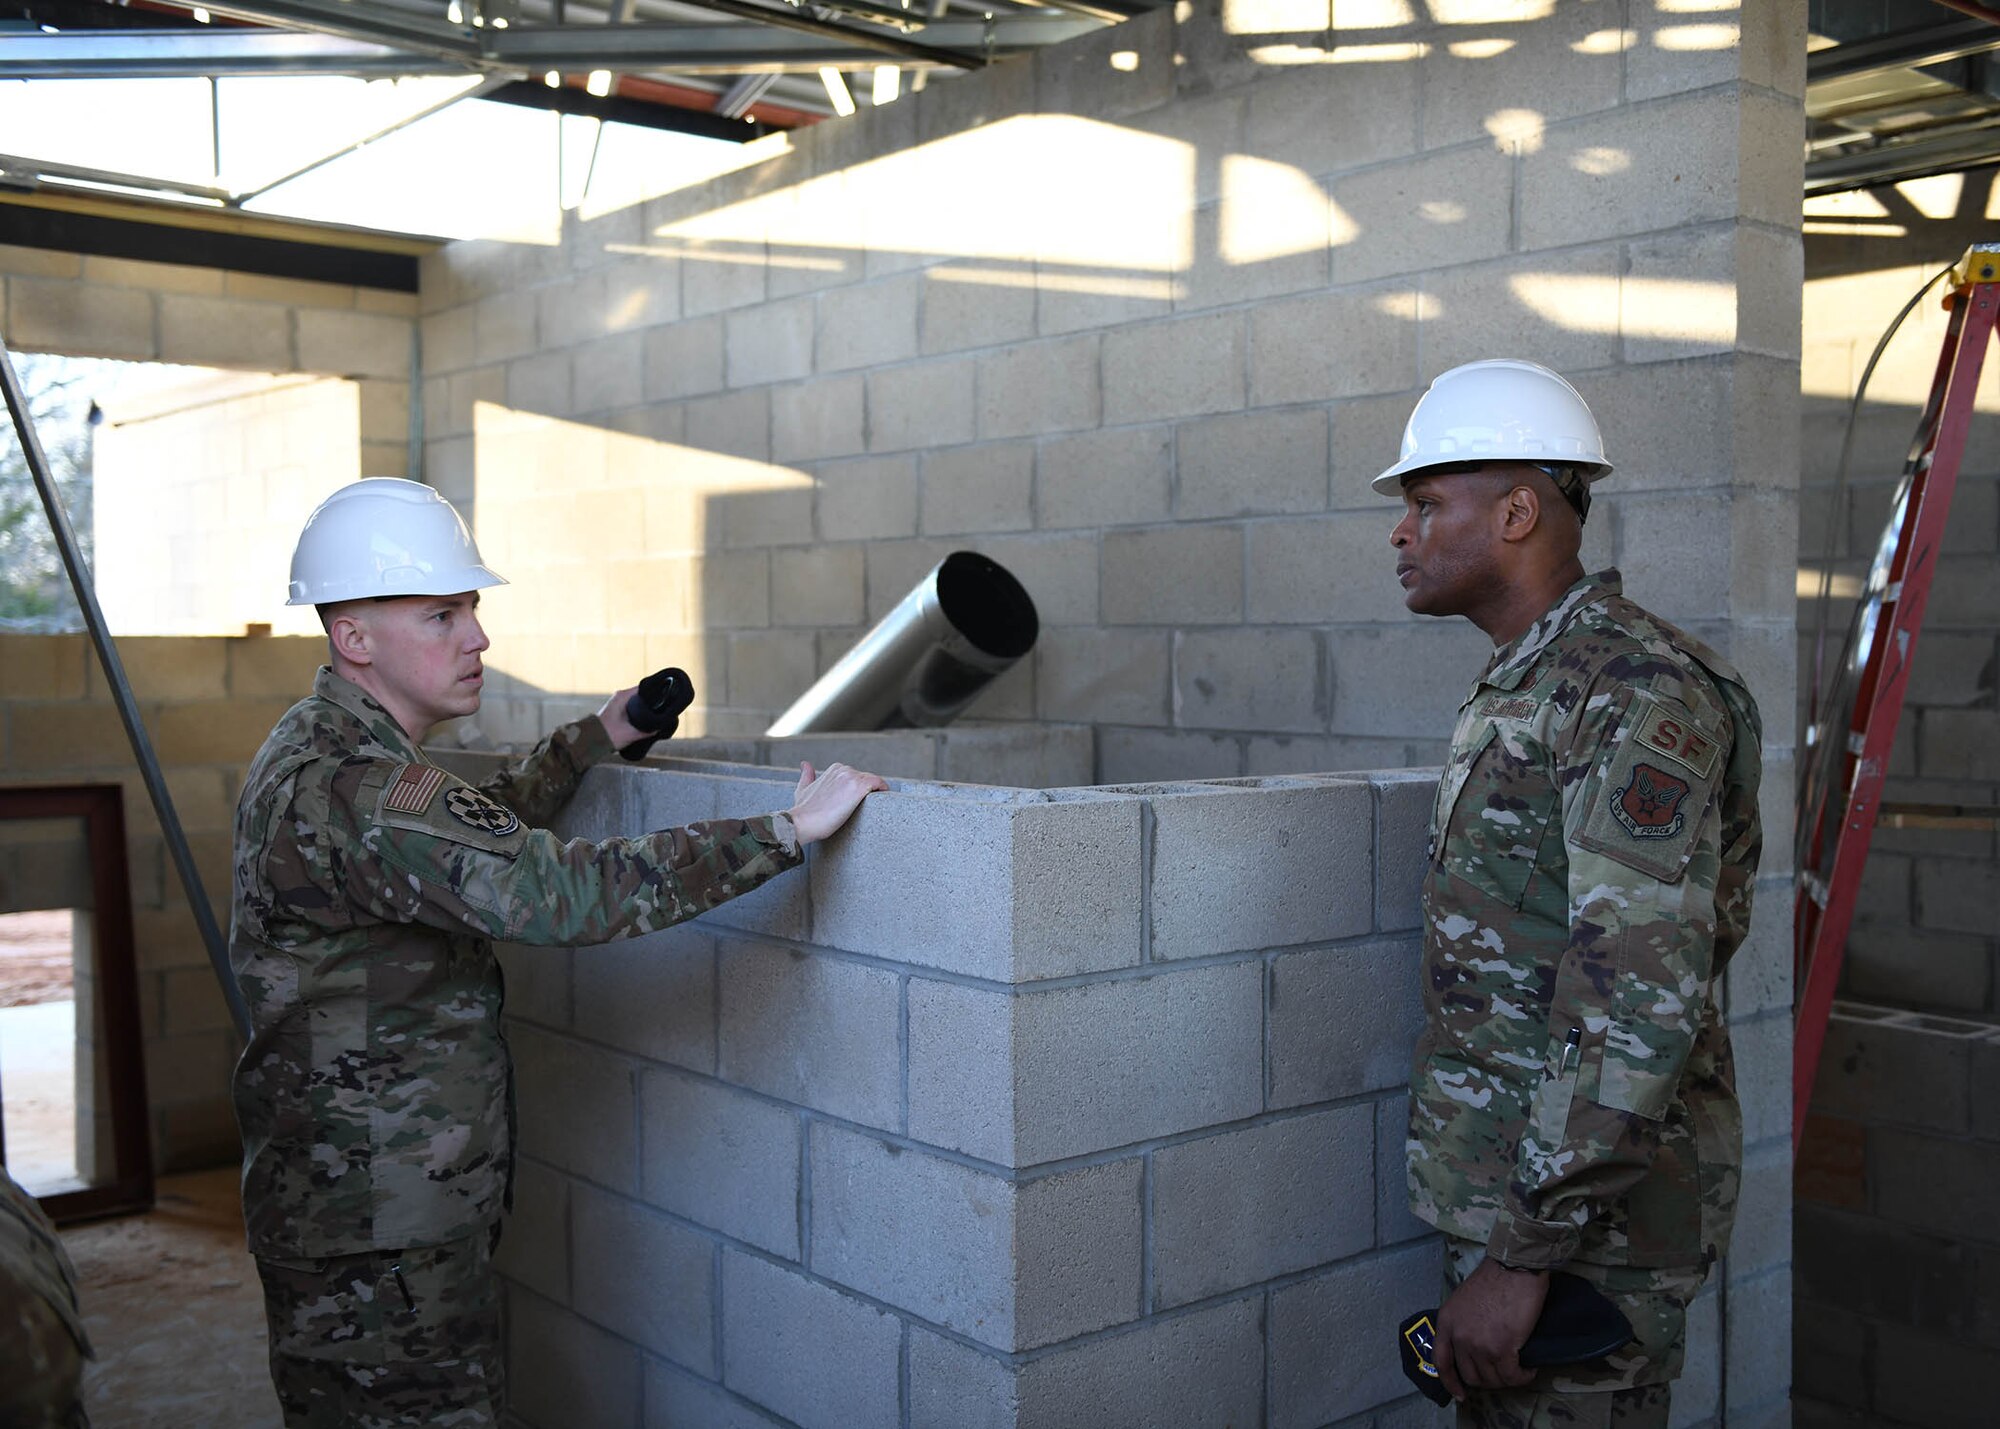 An Airman talks to another Airman in a building that is under construction.